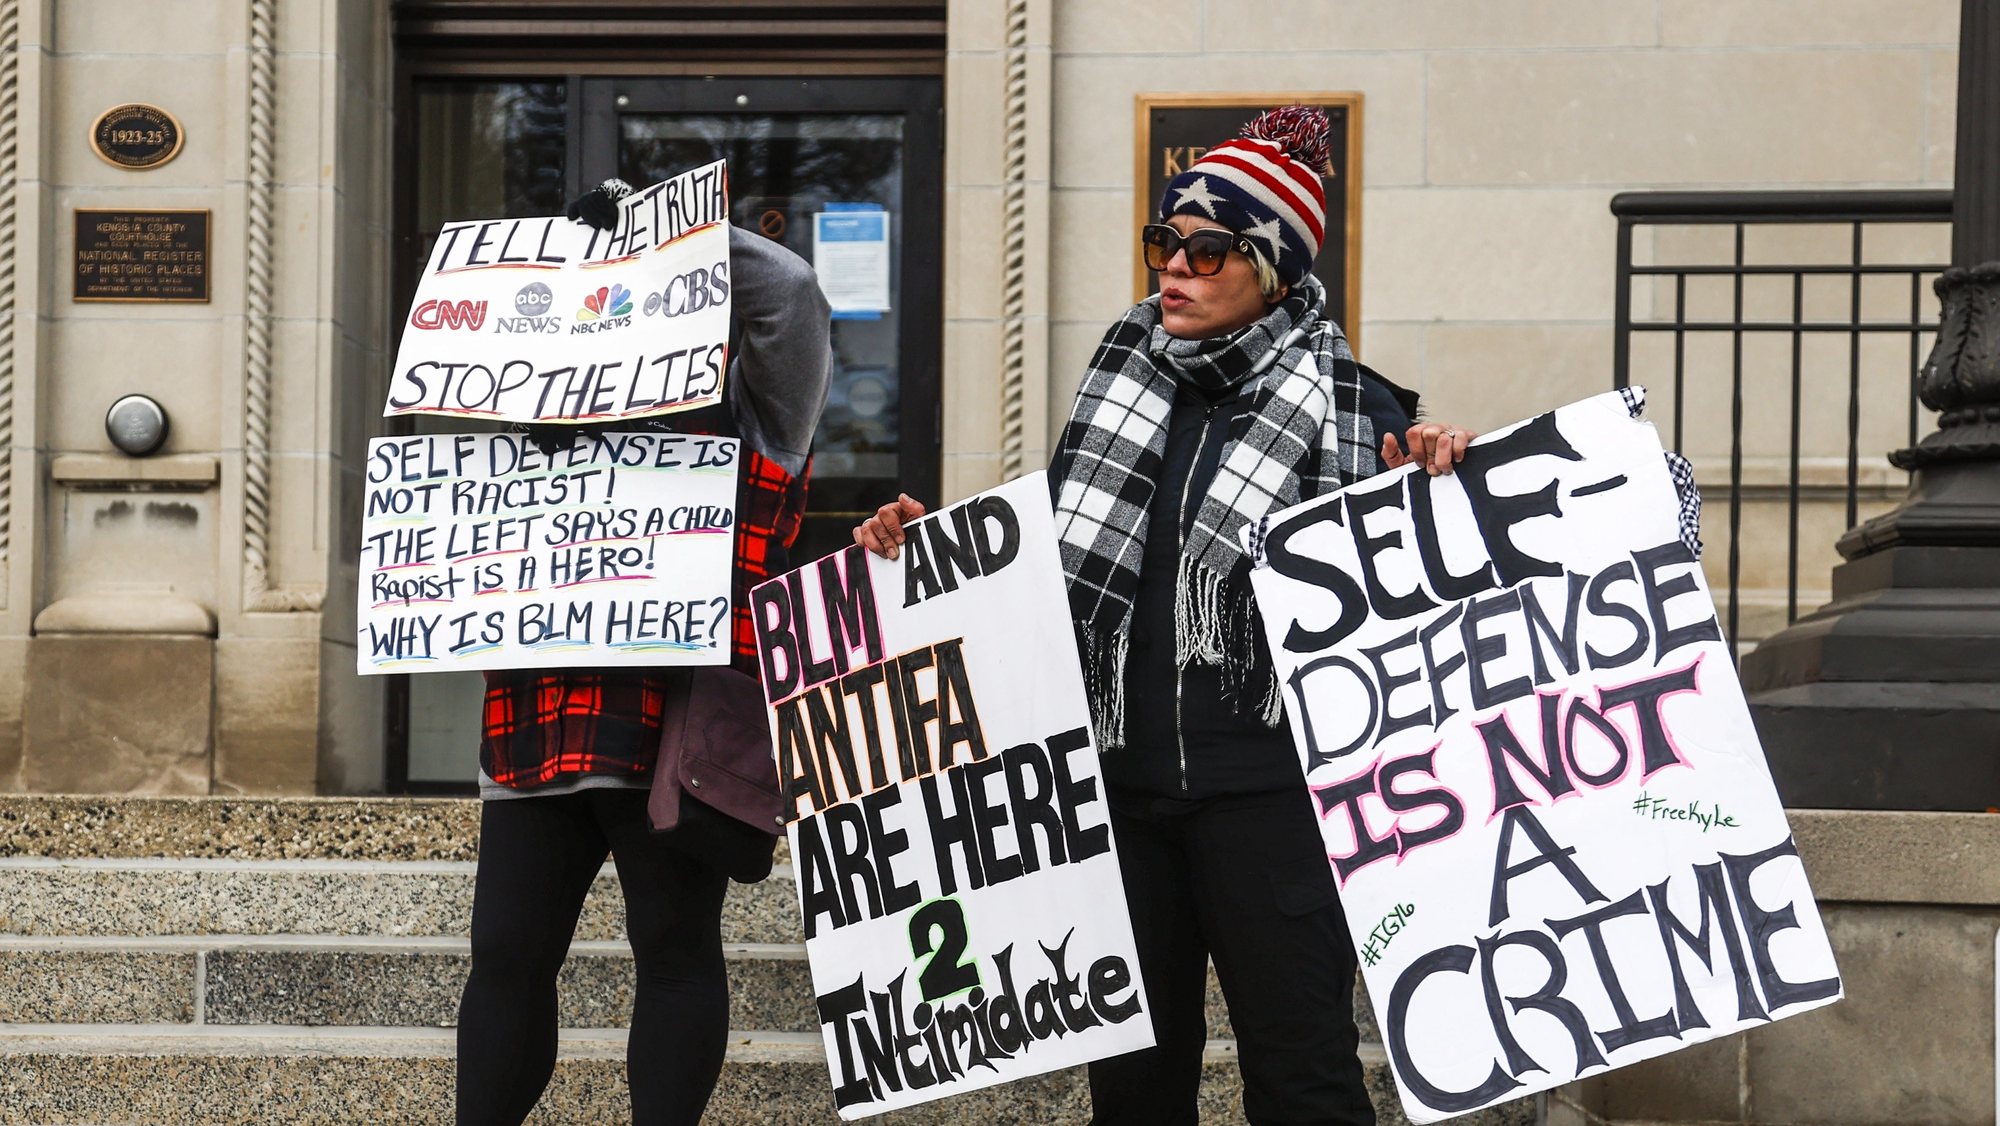 epa09585743 Protesters stand outside the Kenosha County courthouse as the jury deliberates in the trial of Kyle Rittenhouse, in Kenosha, Wisconsin, USA, 16 November 2021. Rittenhouse is being tried for the fatal shootings of Joseph Rosenbaun and Anthony Huber, and the wounding of Gaige Grosskreutz on 25 August 2020 during civil unrest in response to the police shooting of Jacob Blake.  EPA/TANNEN MAURY